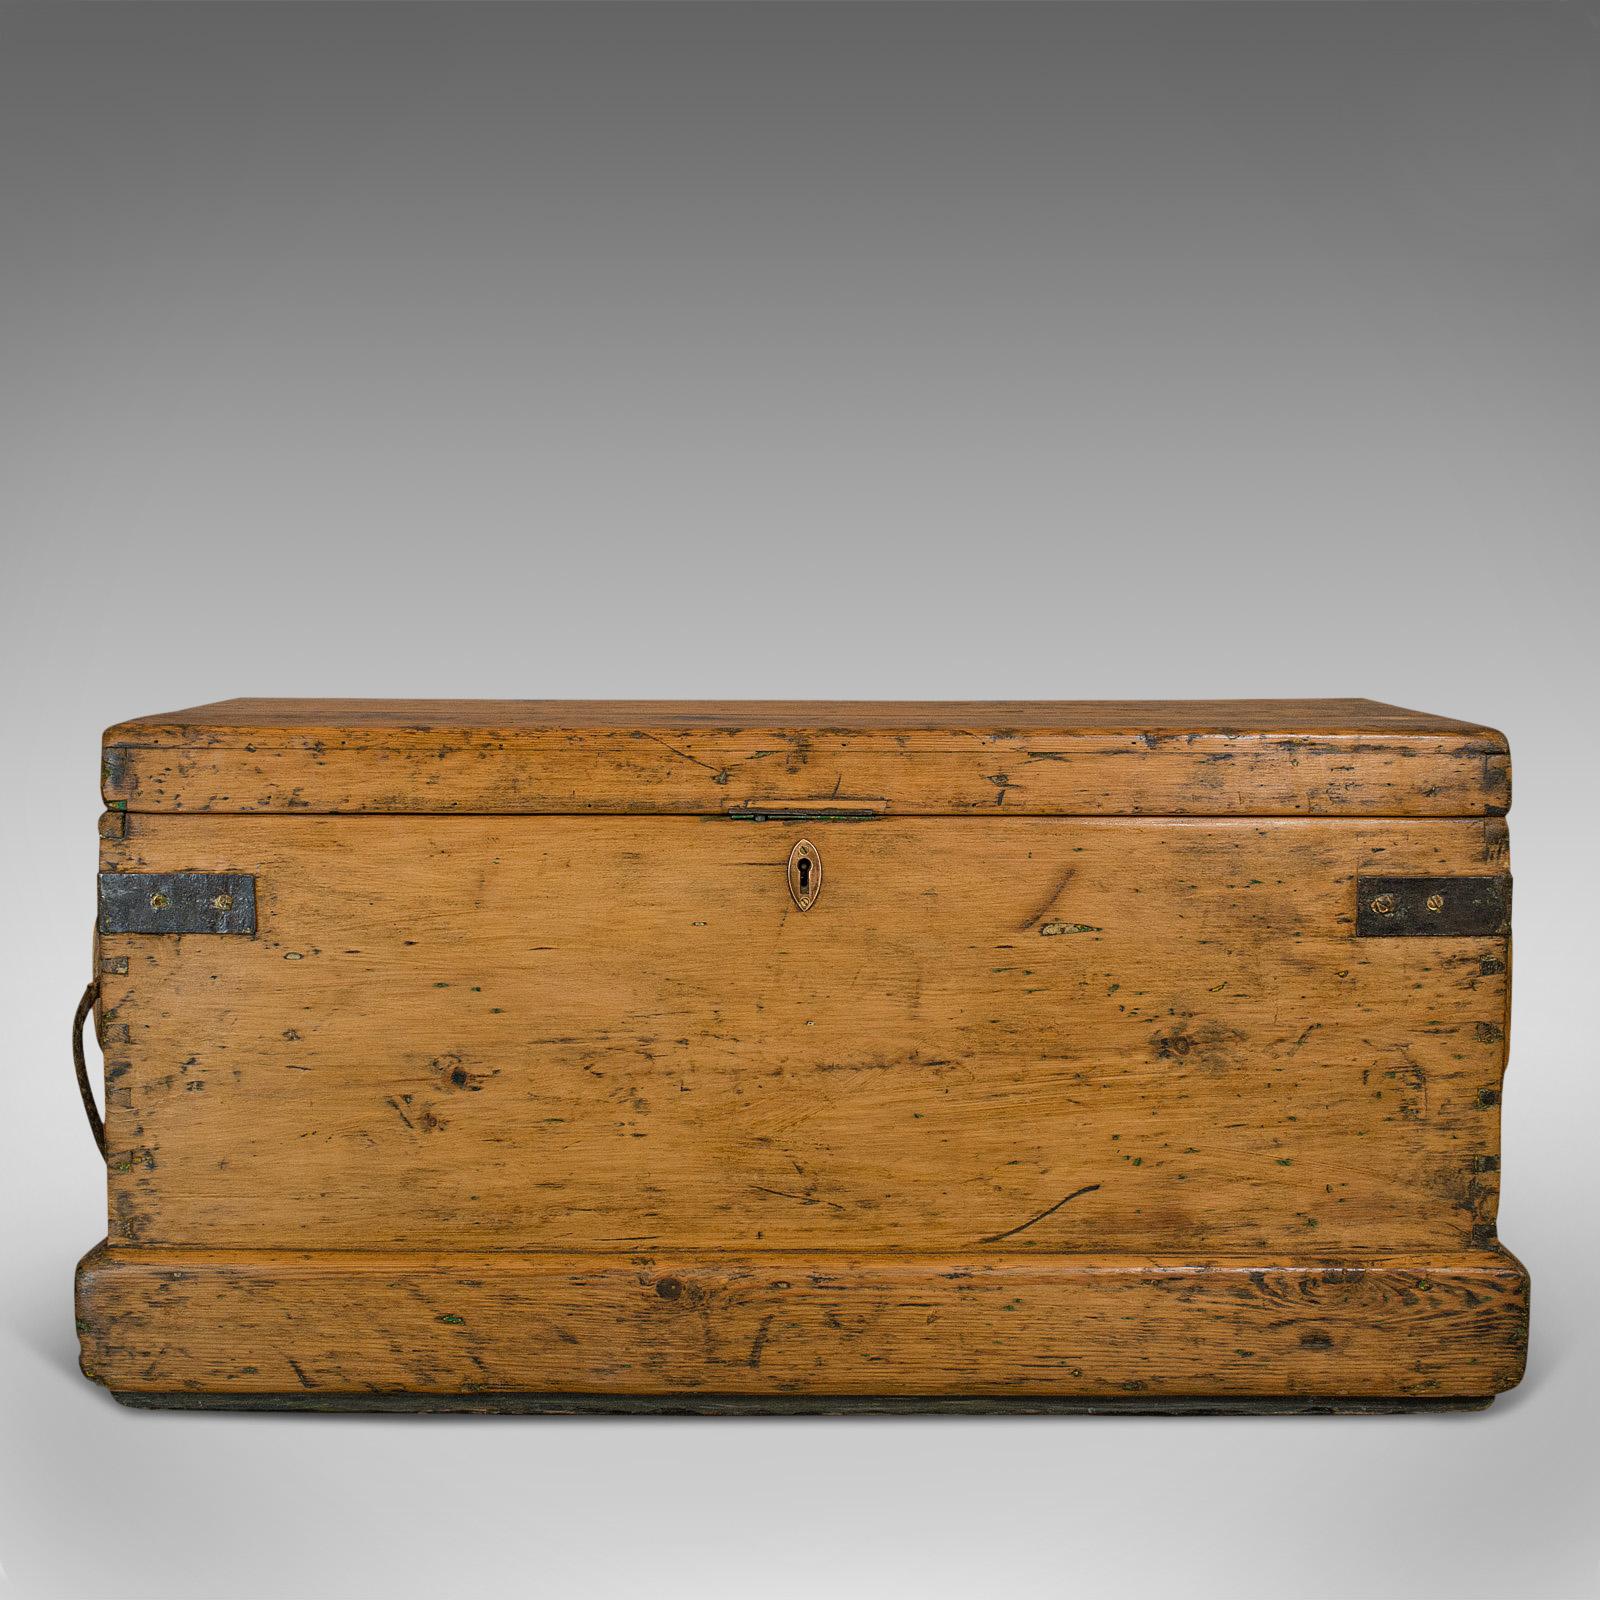 Our stock # 18.6526

This is an antique shipwright's tool chest. An English, pine maritime craftsman's trunk, dating to the Victorian period, circa 1870.

A splendid antique chest
Displays a desirable aged patina
Select pine shows fine grain